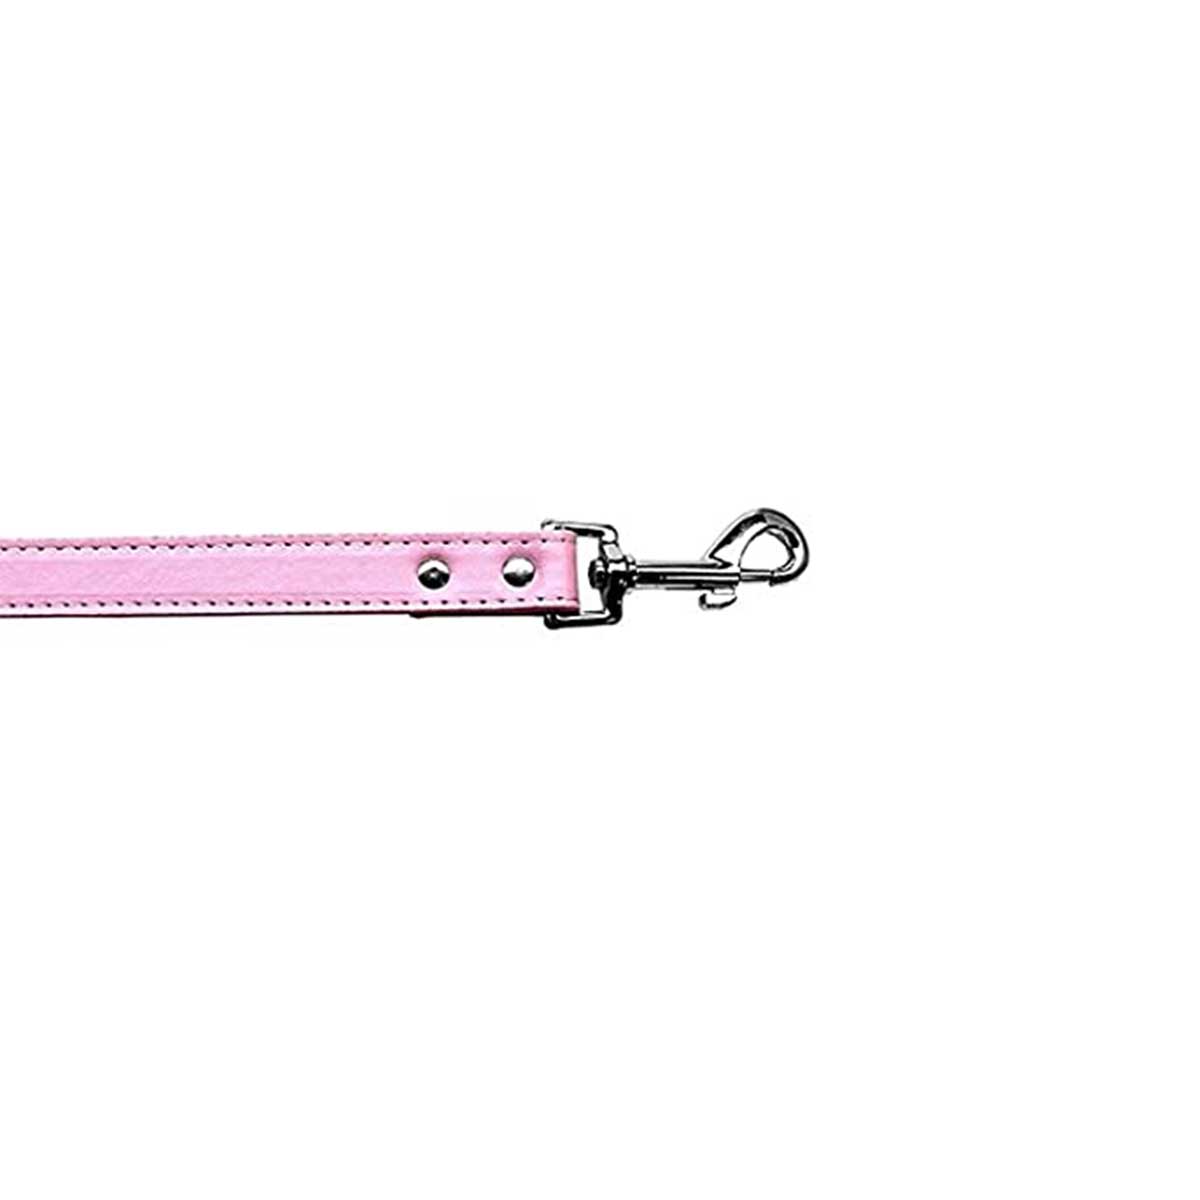 Plain Faux Leather Pet Leash in Pink | Pawlicious & Company